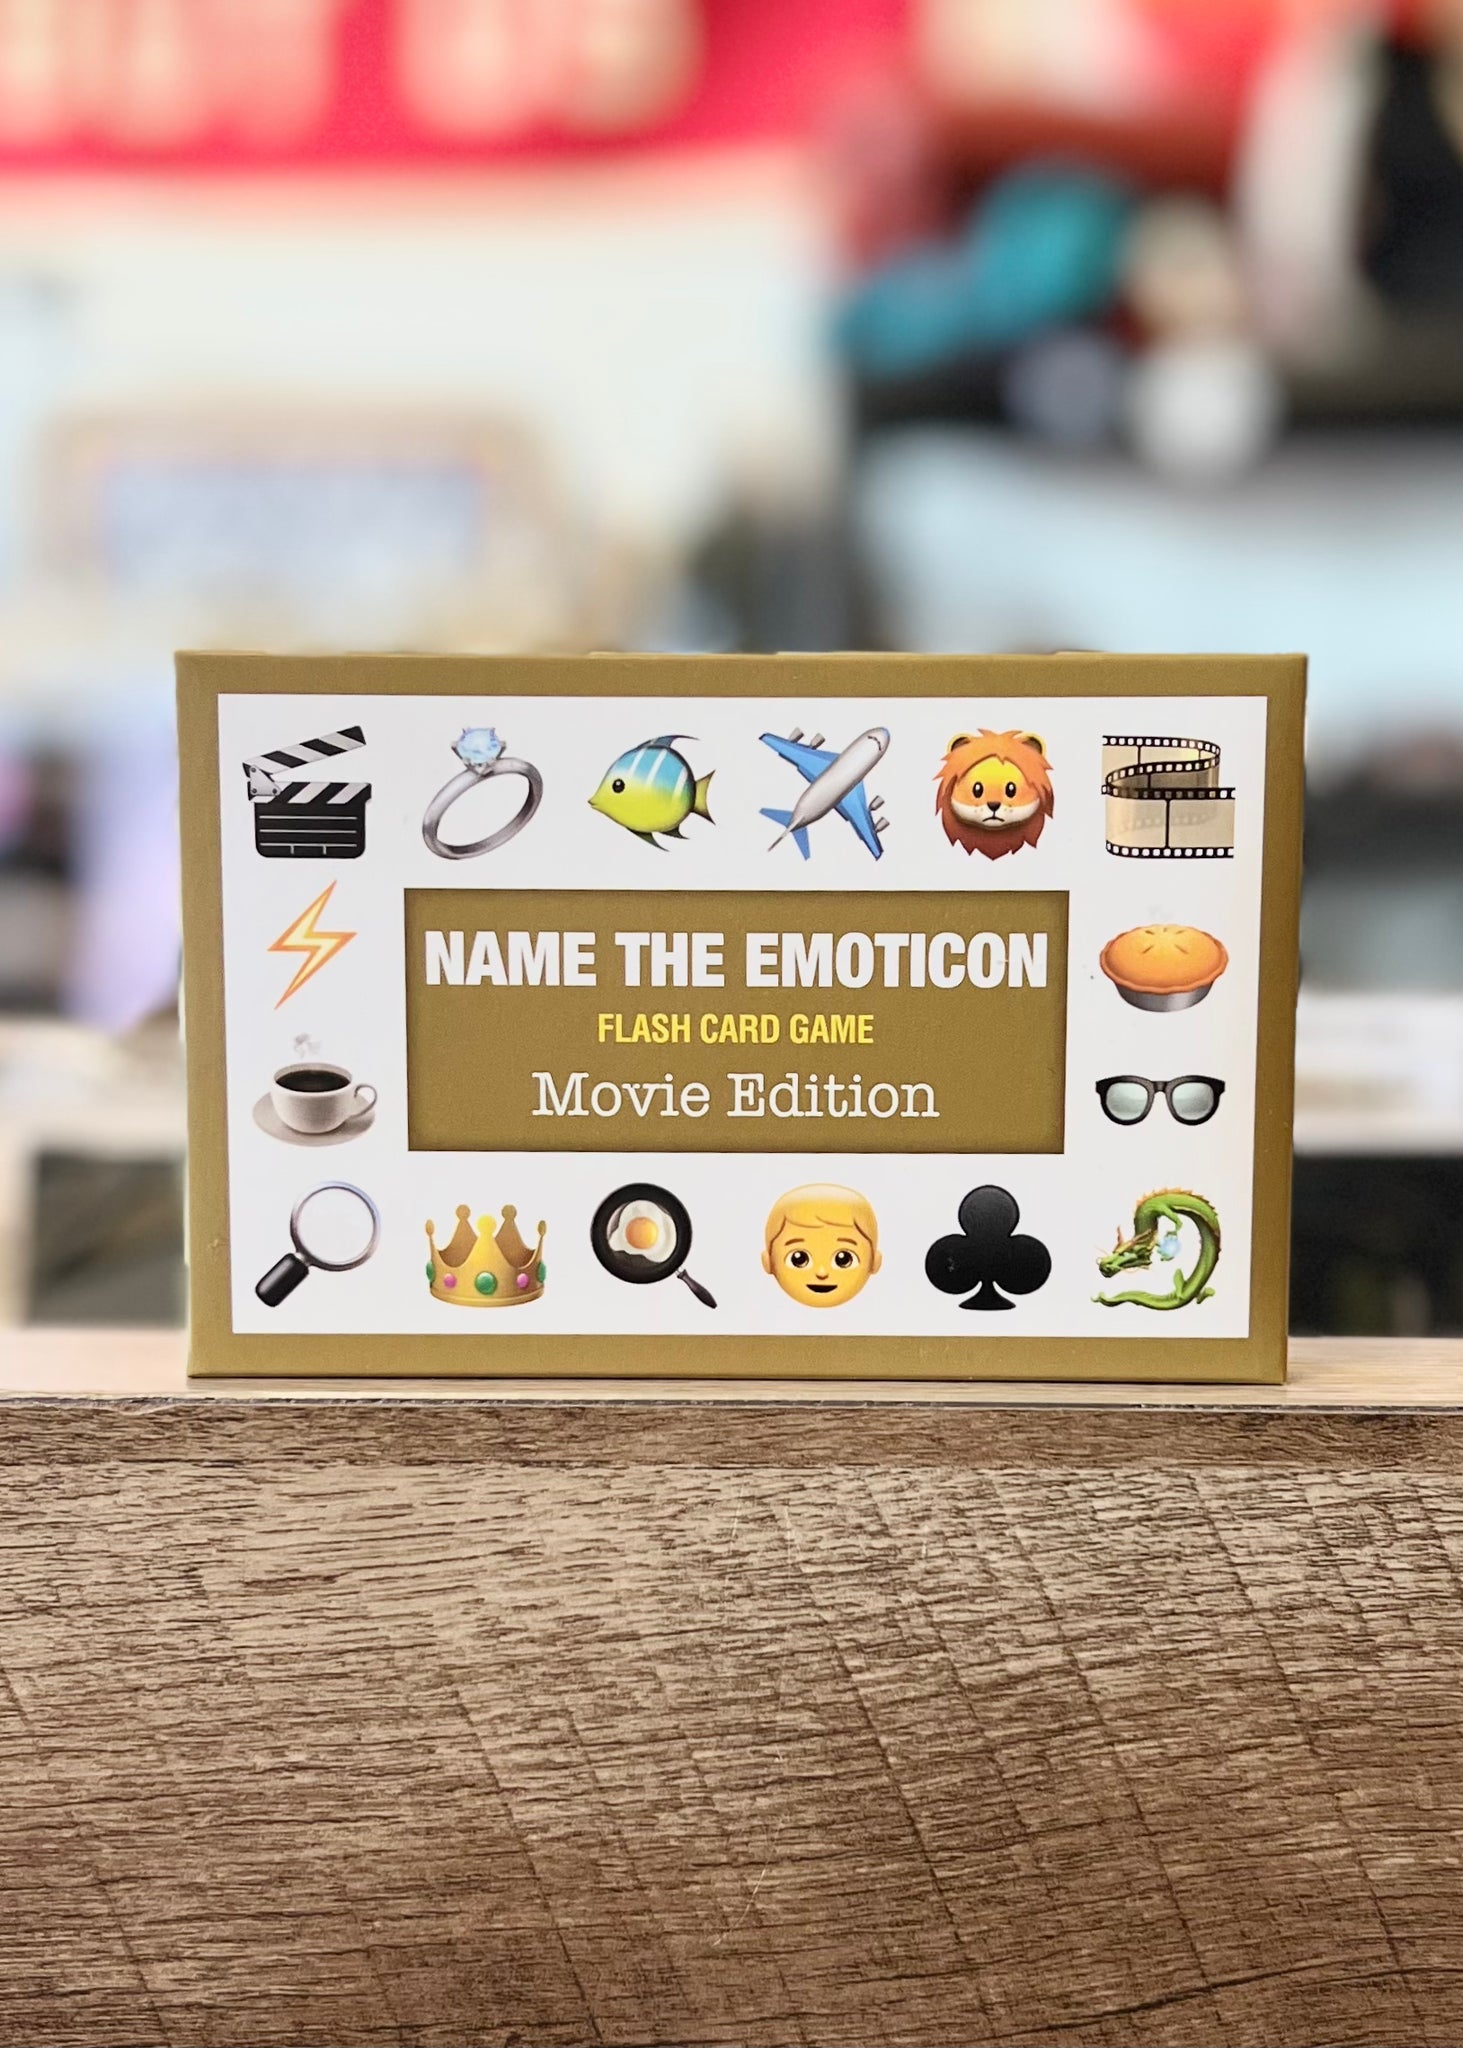 Name the emoticon flash card game Movie Edition by Bubblegum Stuff, Sold by Le Monkey House